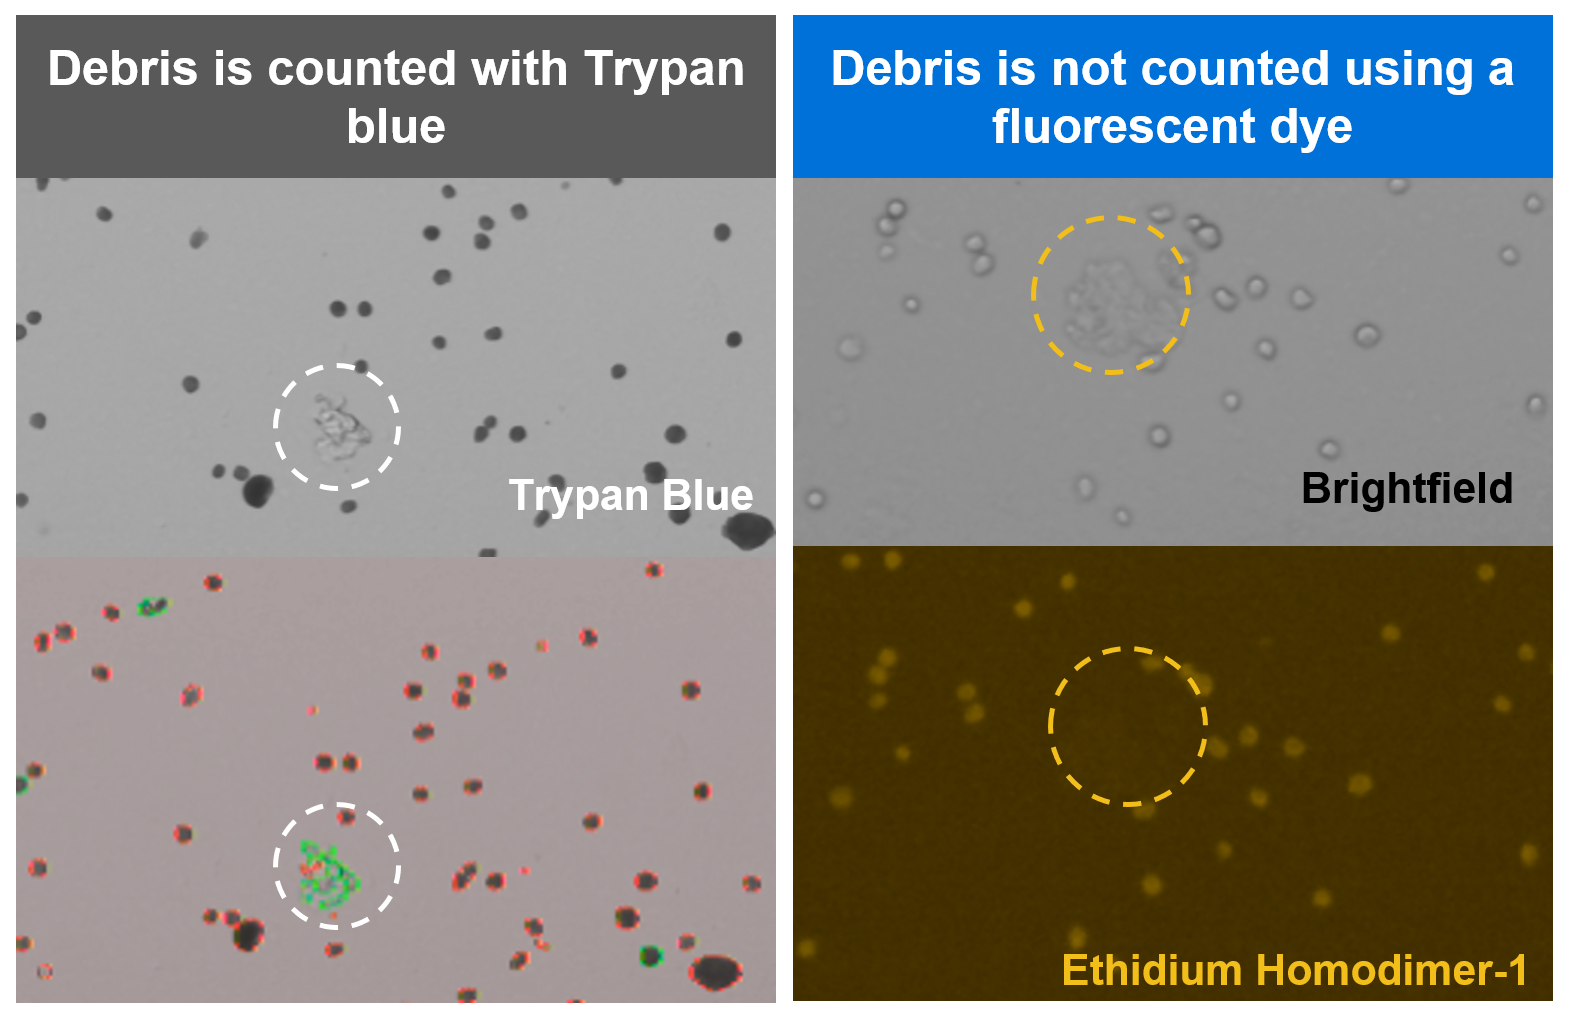 Examples of cell counting for fixed samples using Trypan blue and fluorescent dye.